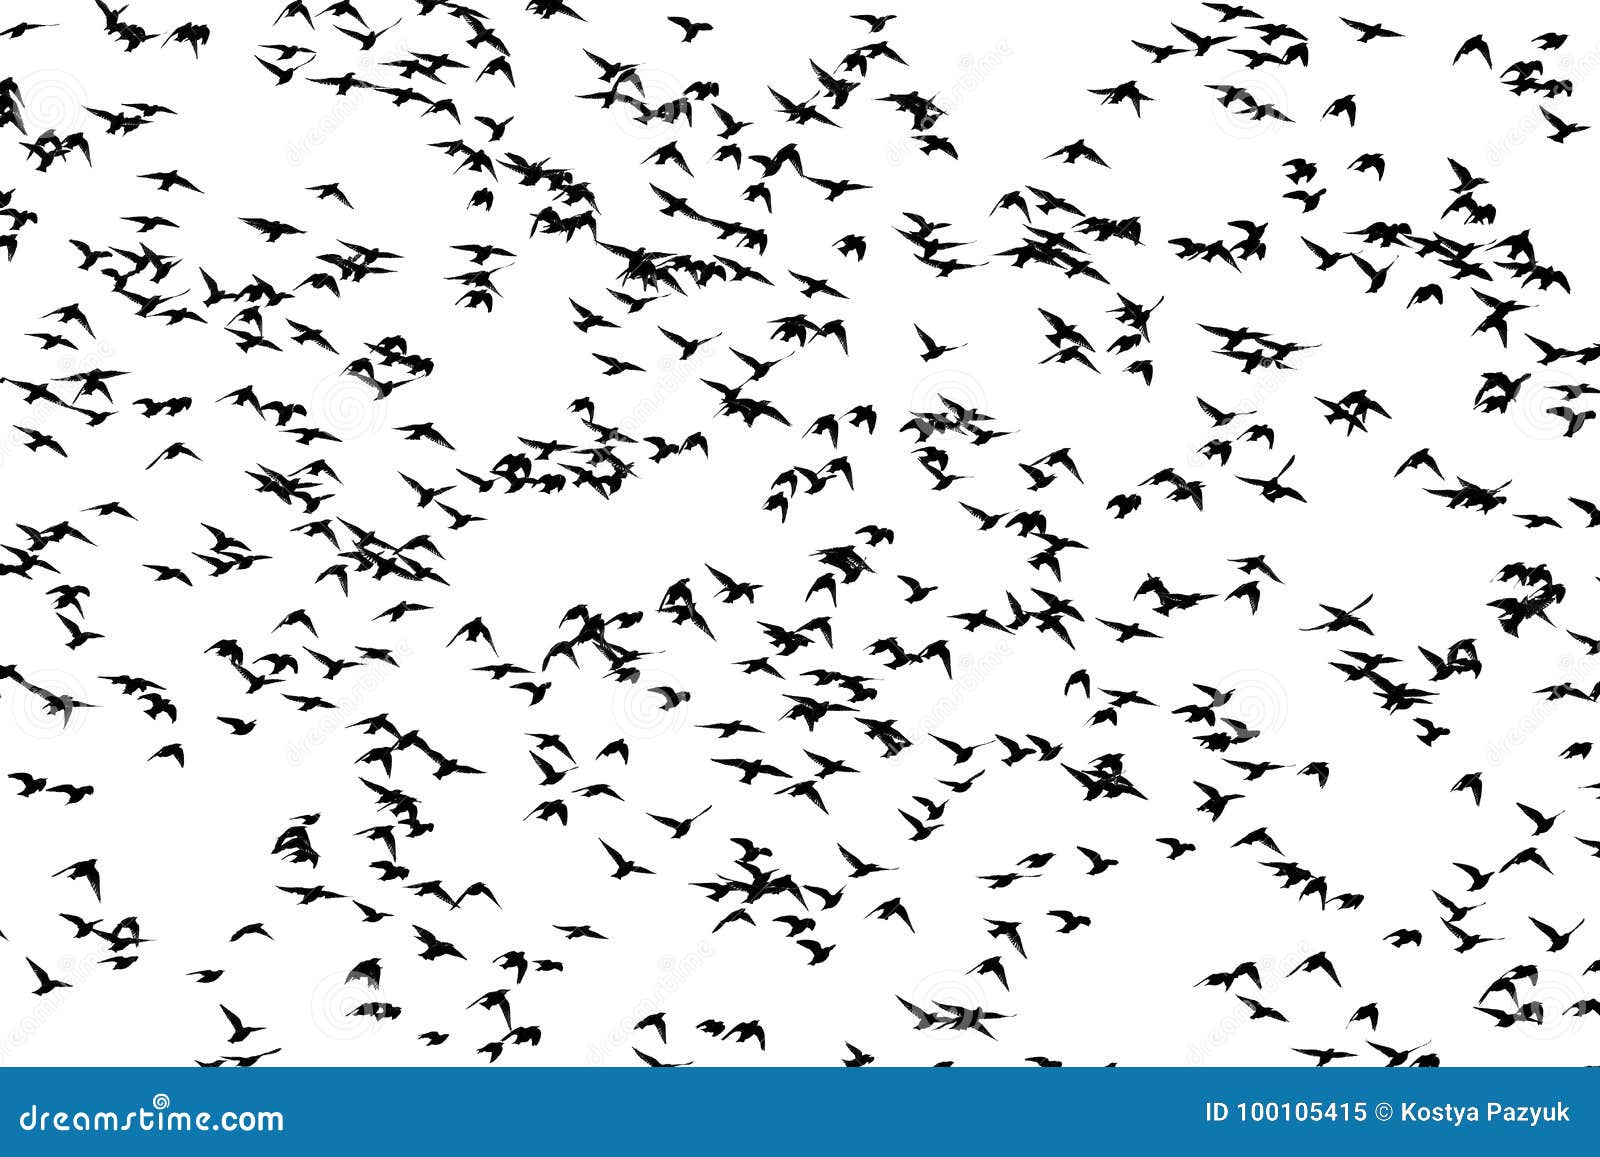 Starlings Fly on a White Background Stock Image - Image of beauty ...